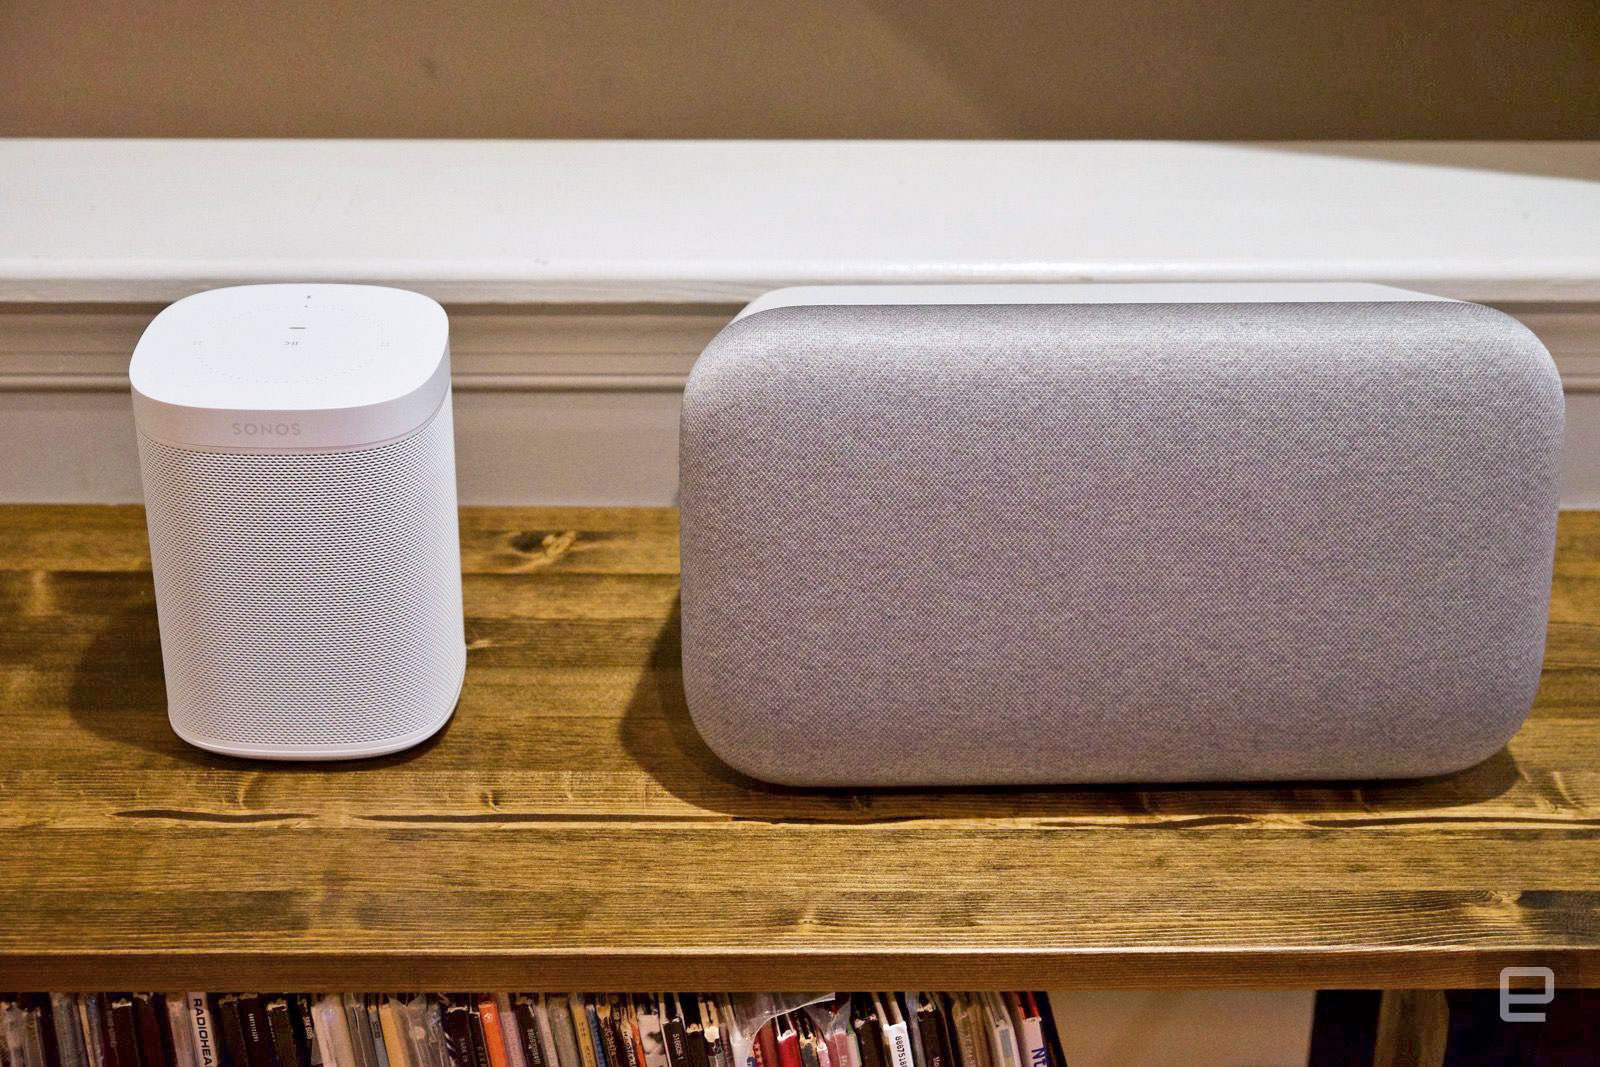 Home review: assistant for lovers | Engadget